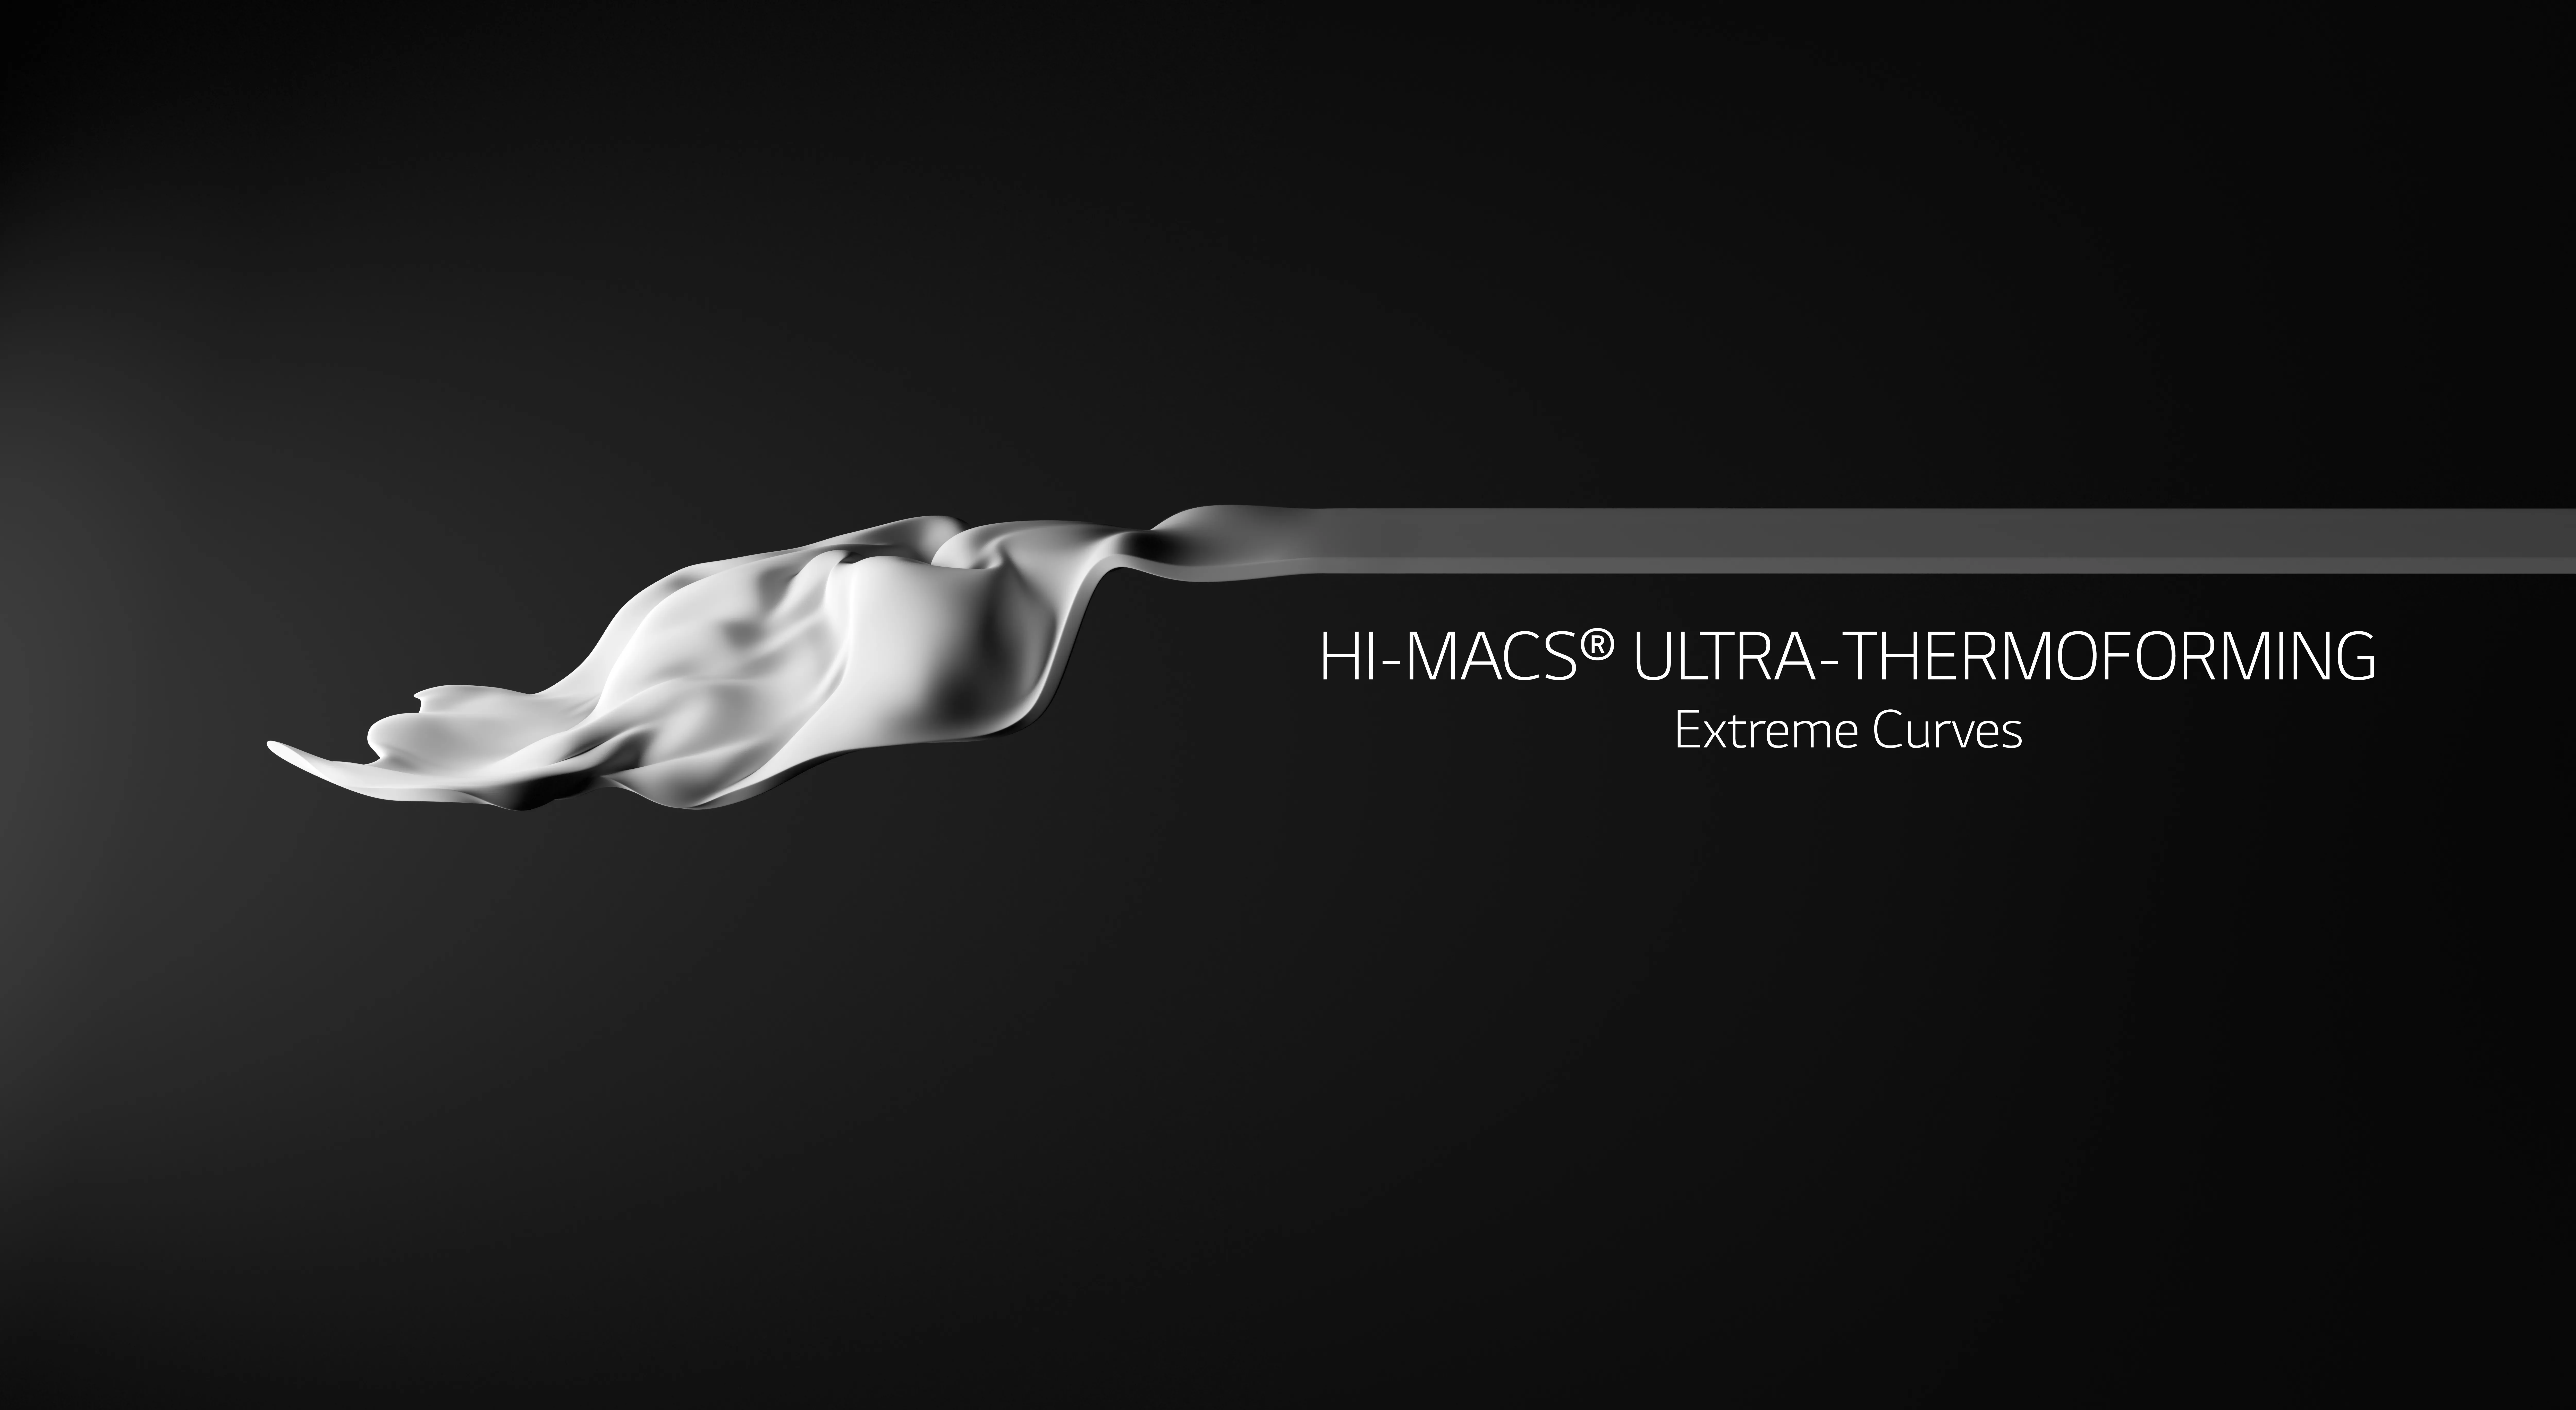  LX Hausys launches the revolutionary HIMACS Ultra-Thermoforming